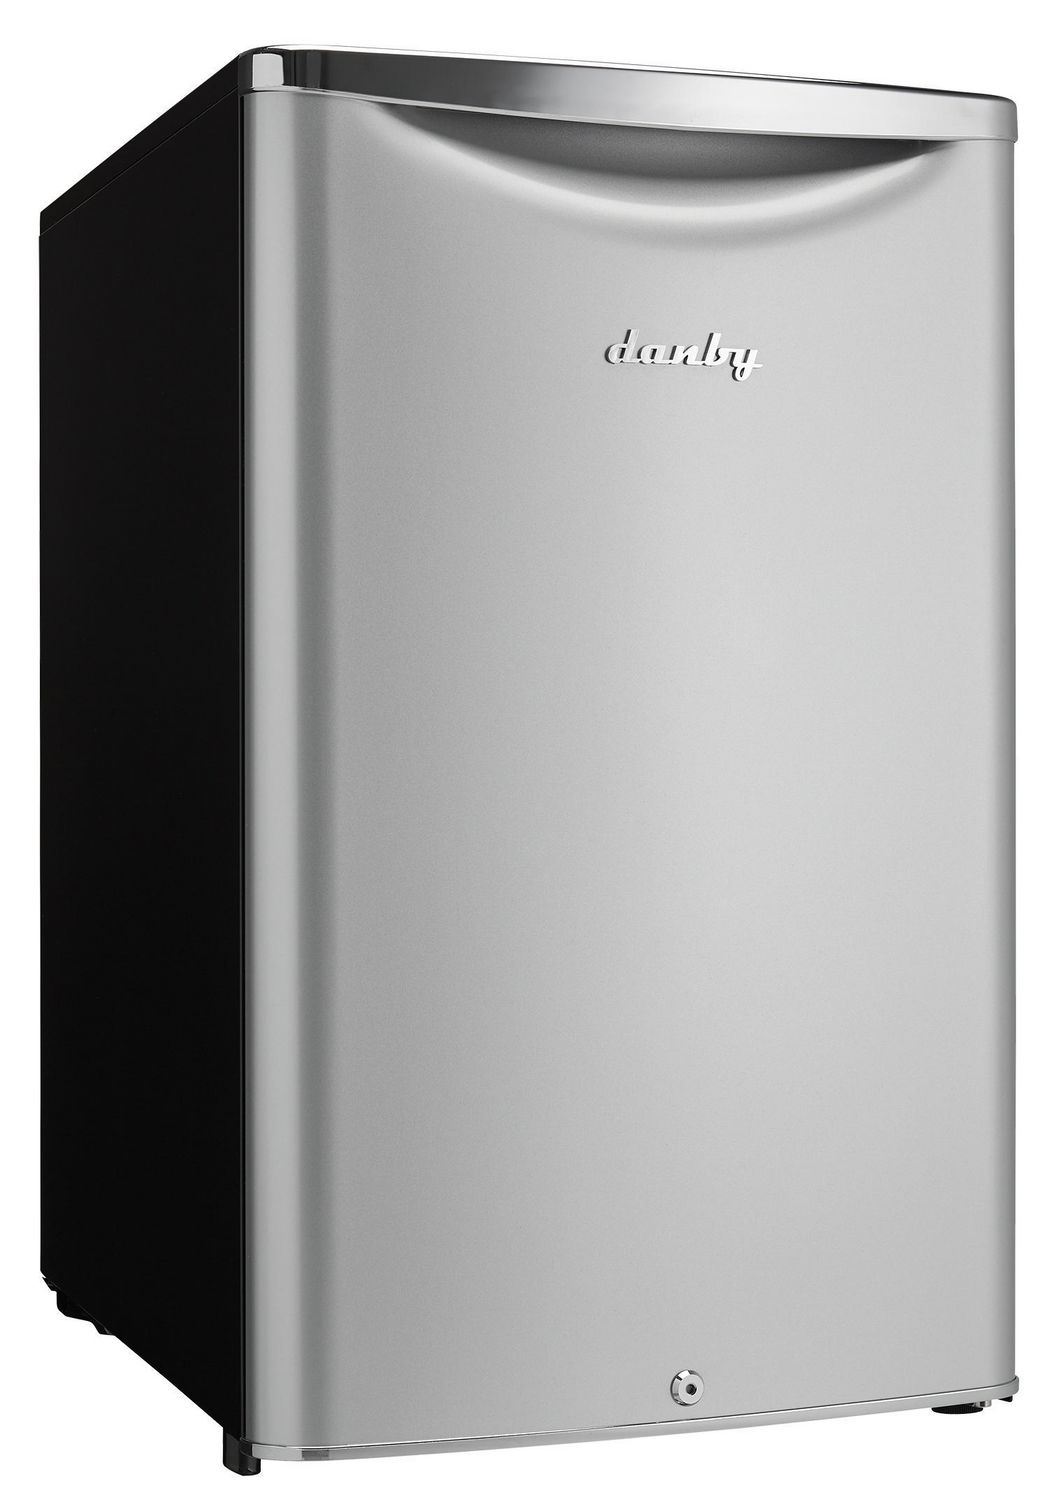 Danby Products Danby 4 4 Cu Ft Compact Refrigerator Walmart Canada